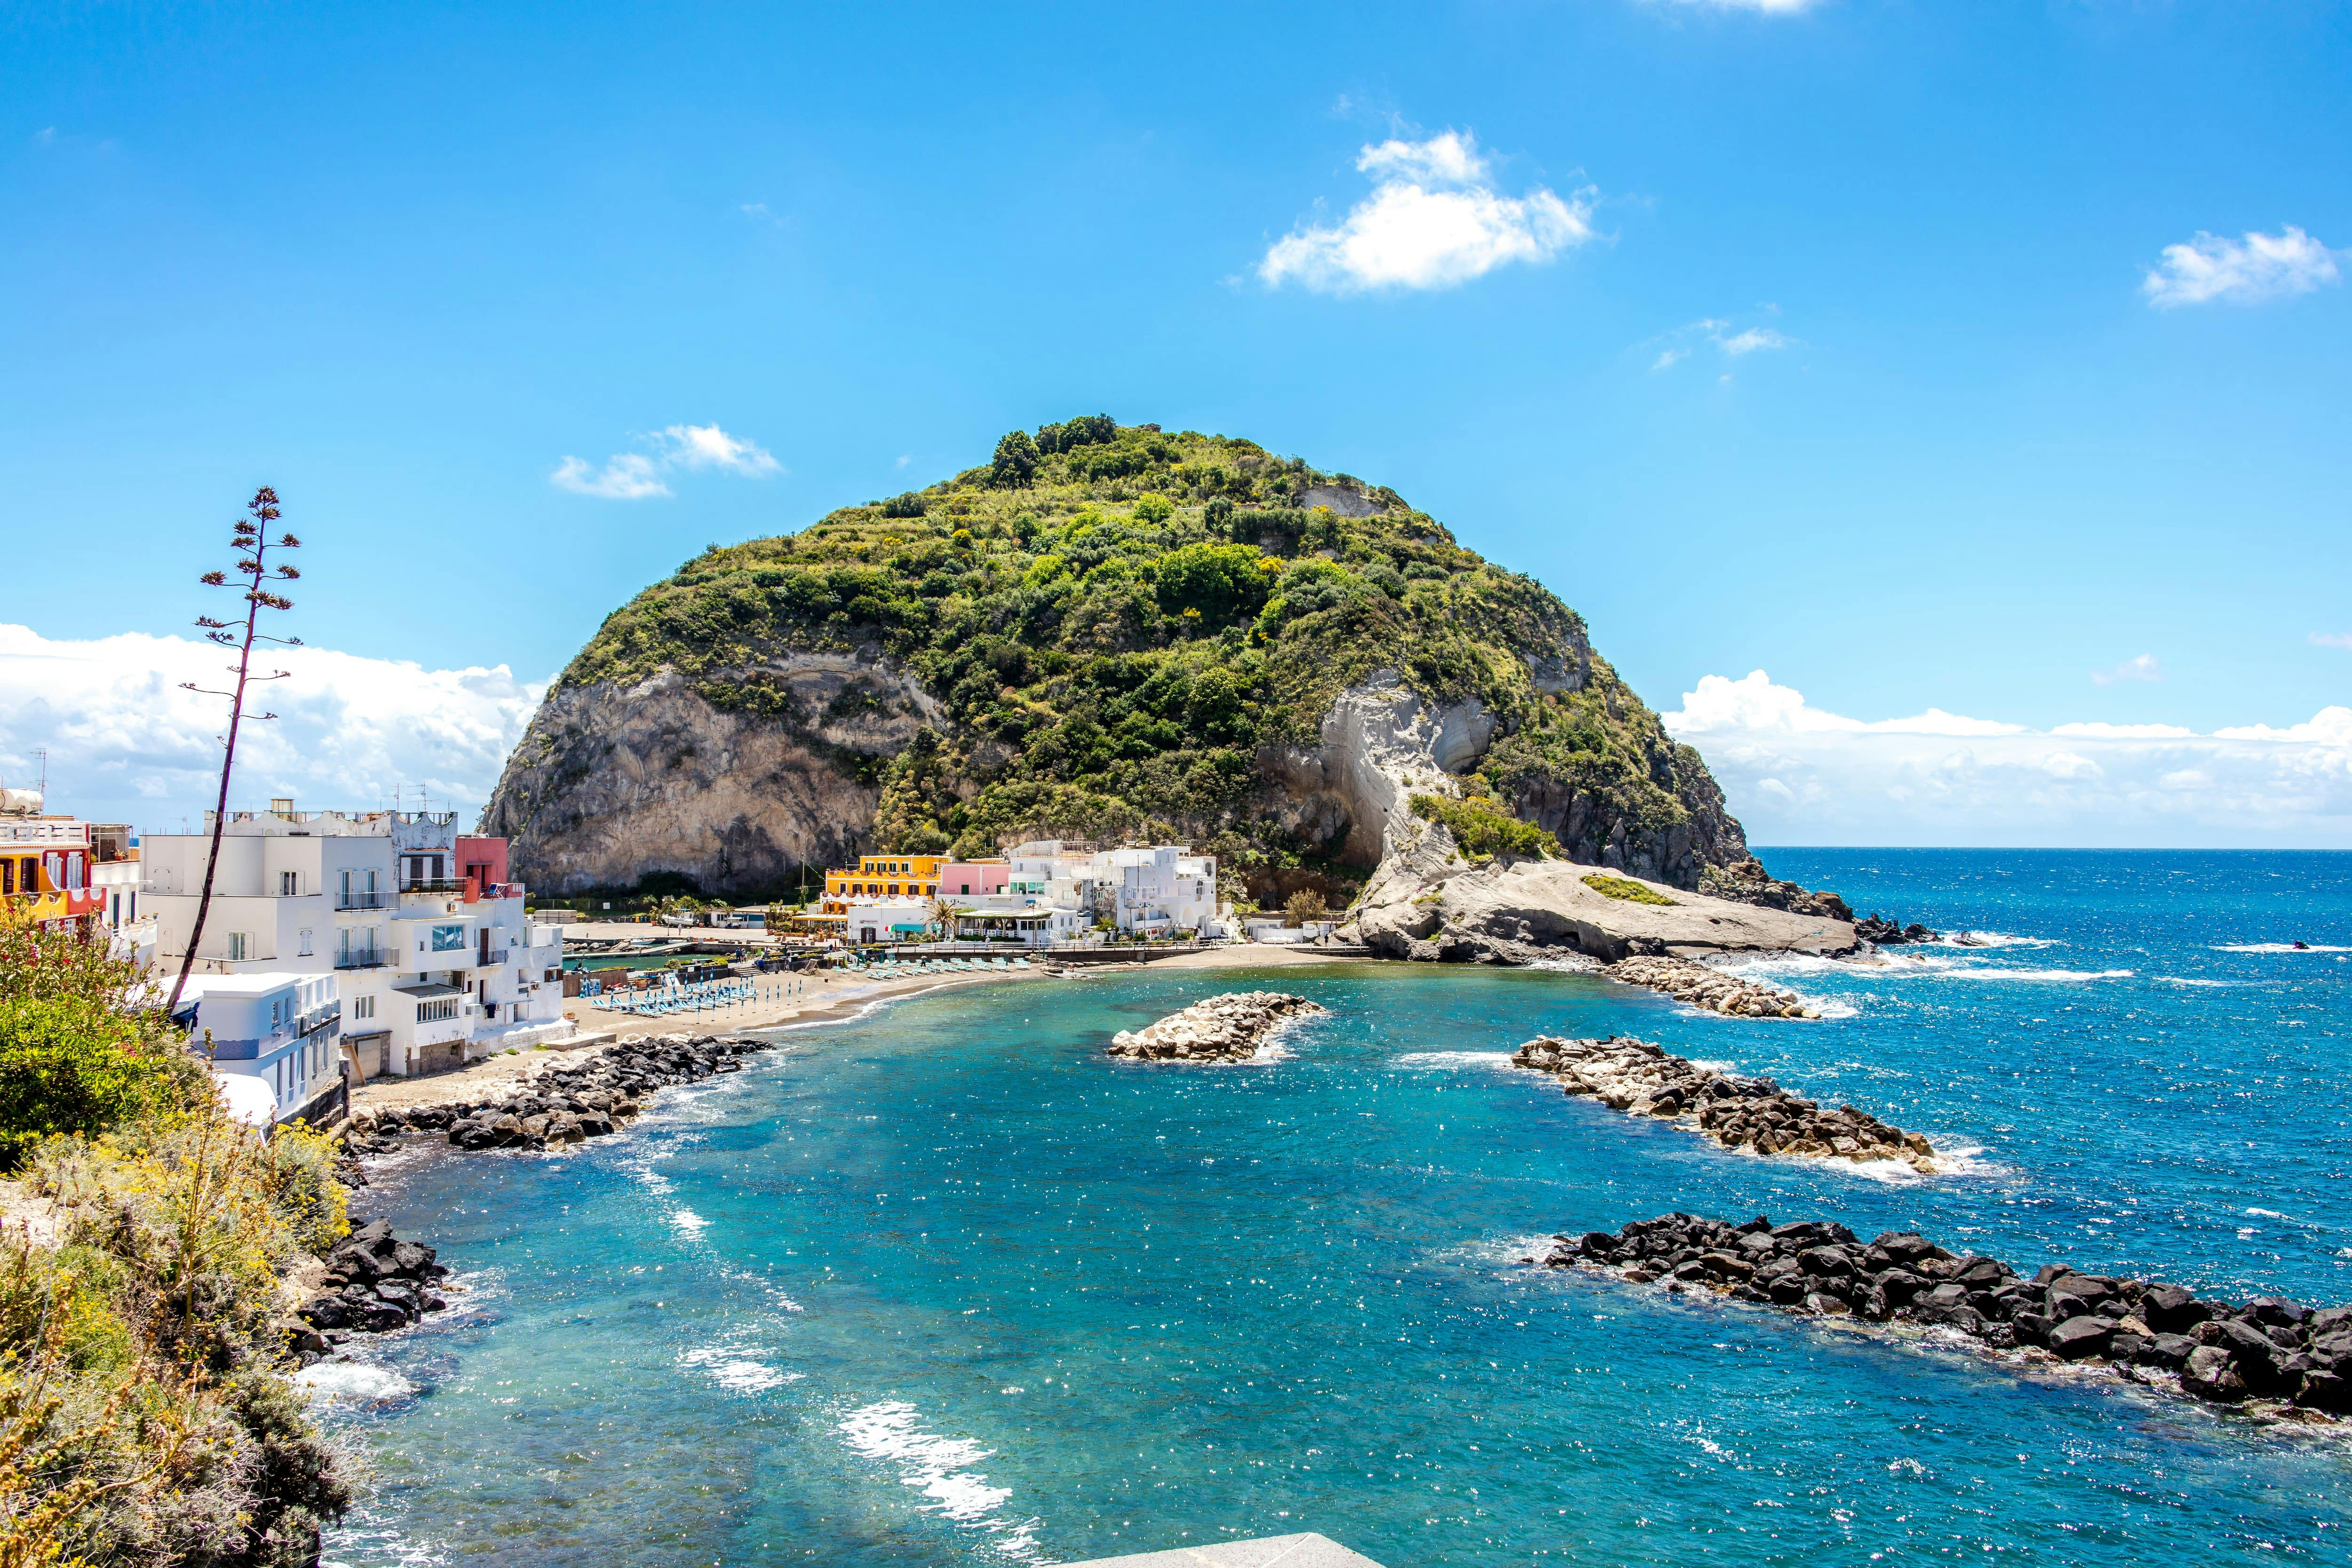 Ischia Island Cruise with Lunch